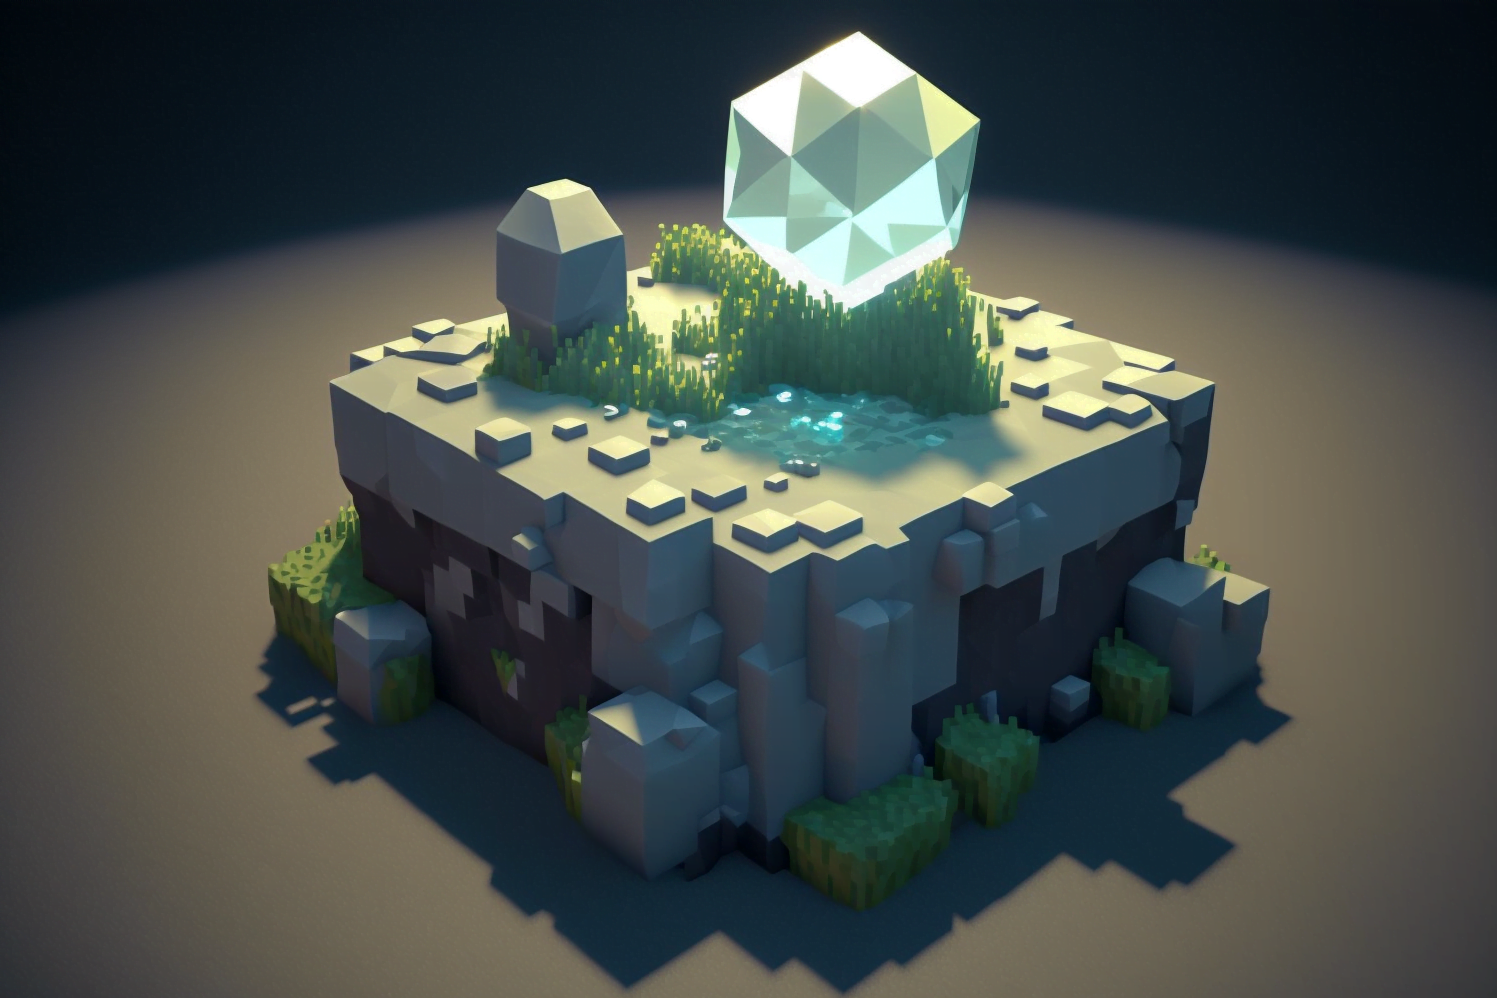 Deepmind’s “DreamerV3” collects Minecraft diamonds without human data